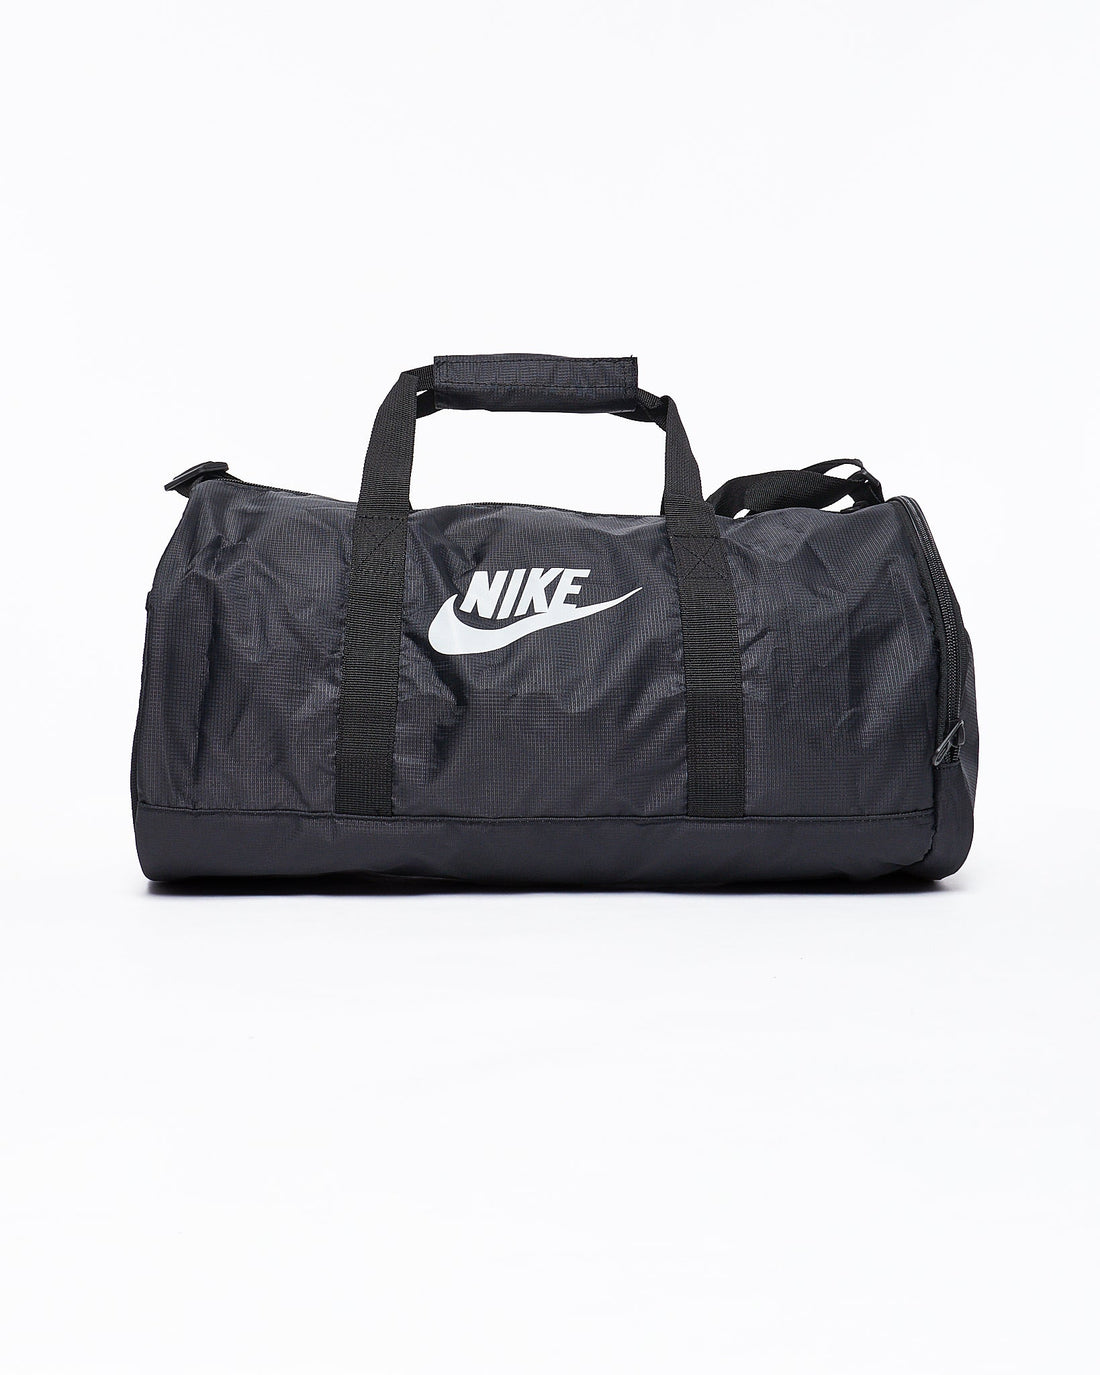 MOI OUTFIT-Swooh Logo Printed Duffle Bag 16.90